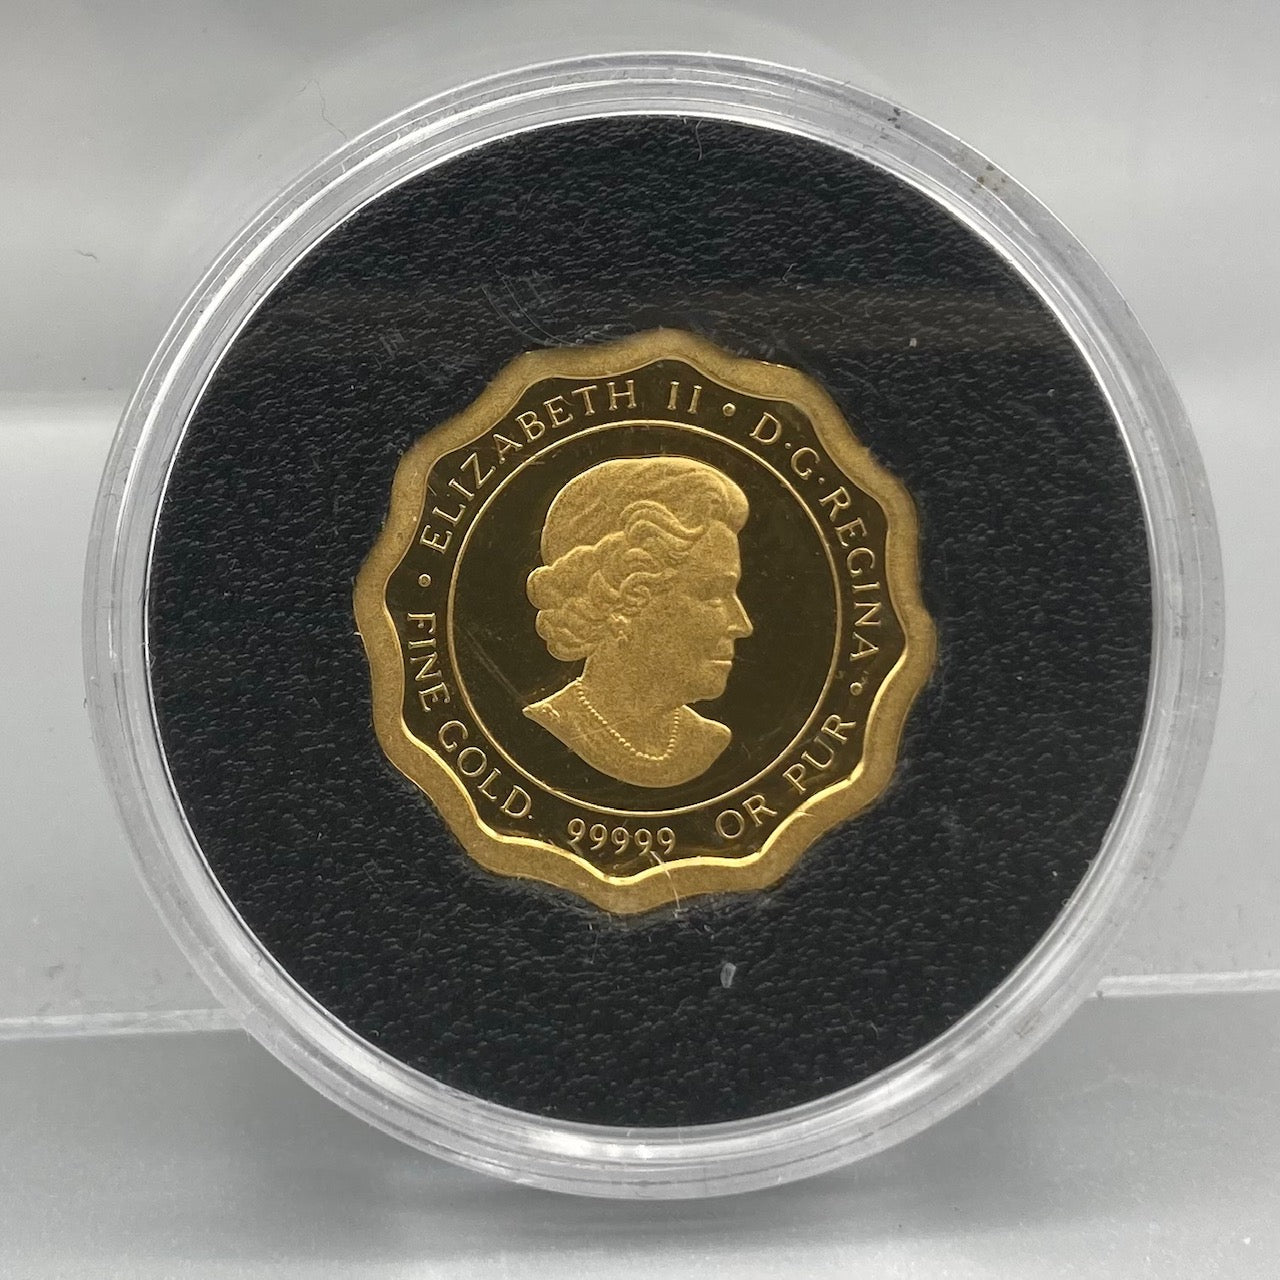 2015 $150 Blessing of Prosperity Gold Coin 99999 (ASK FOR PRICE)